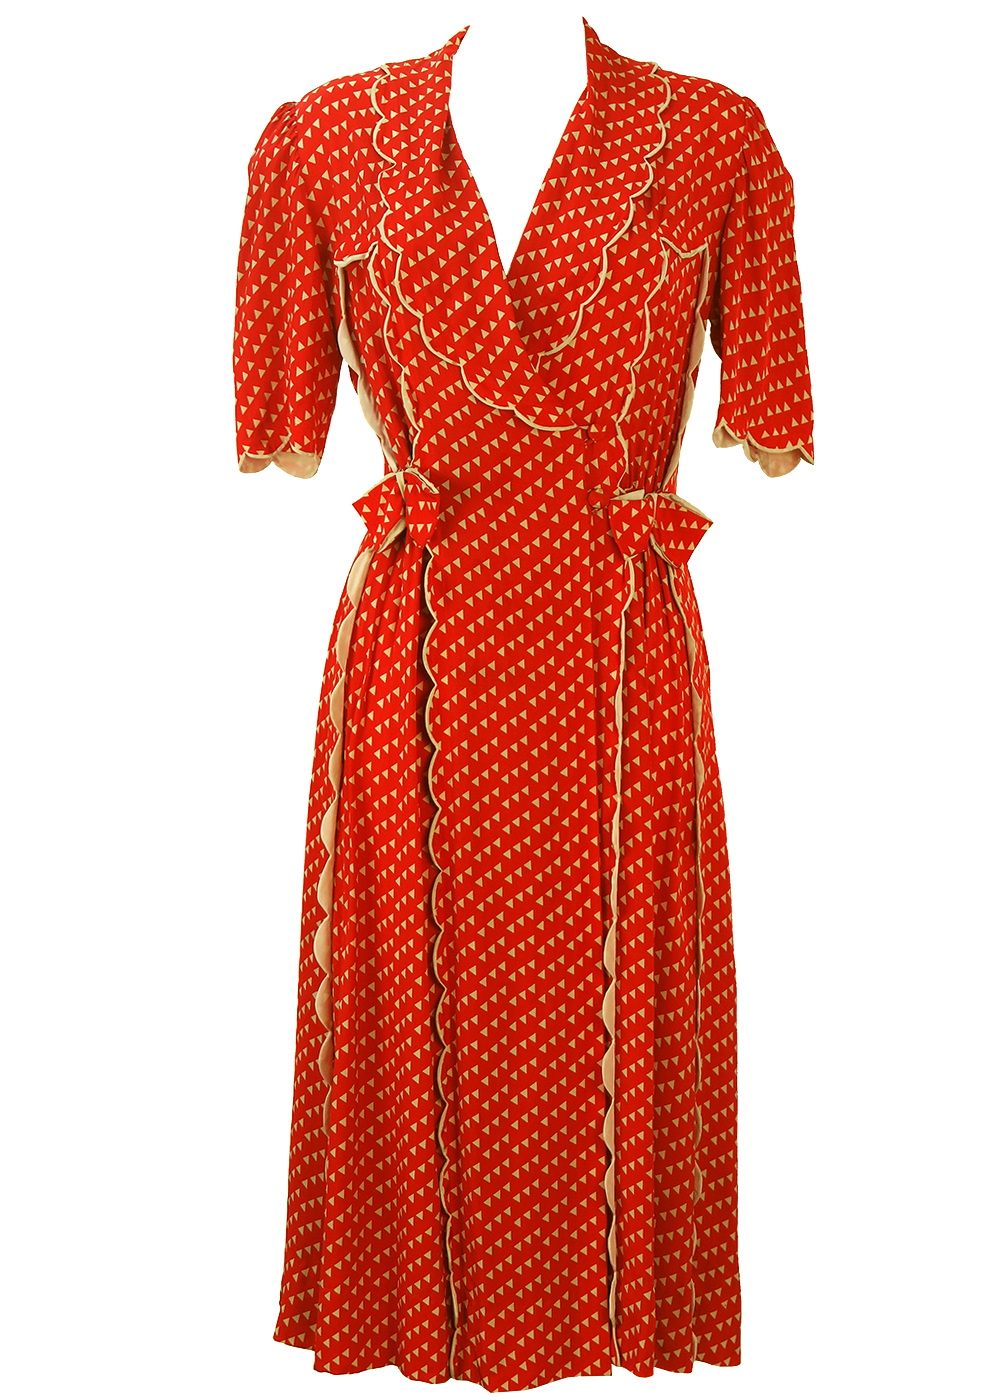 Vintage 1940's Housecoat with Red & Cream Triangle Pattern and Scallop ...